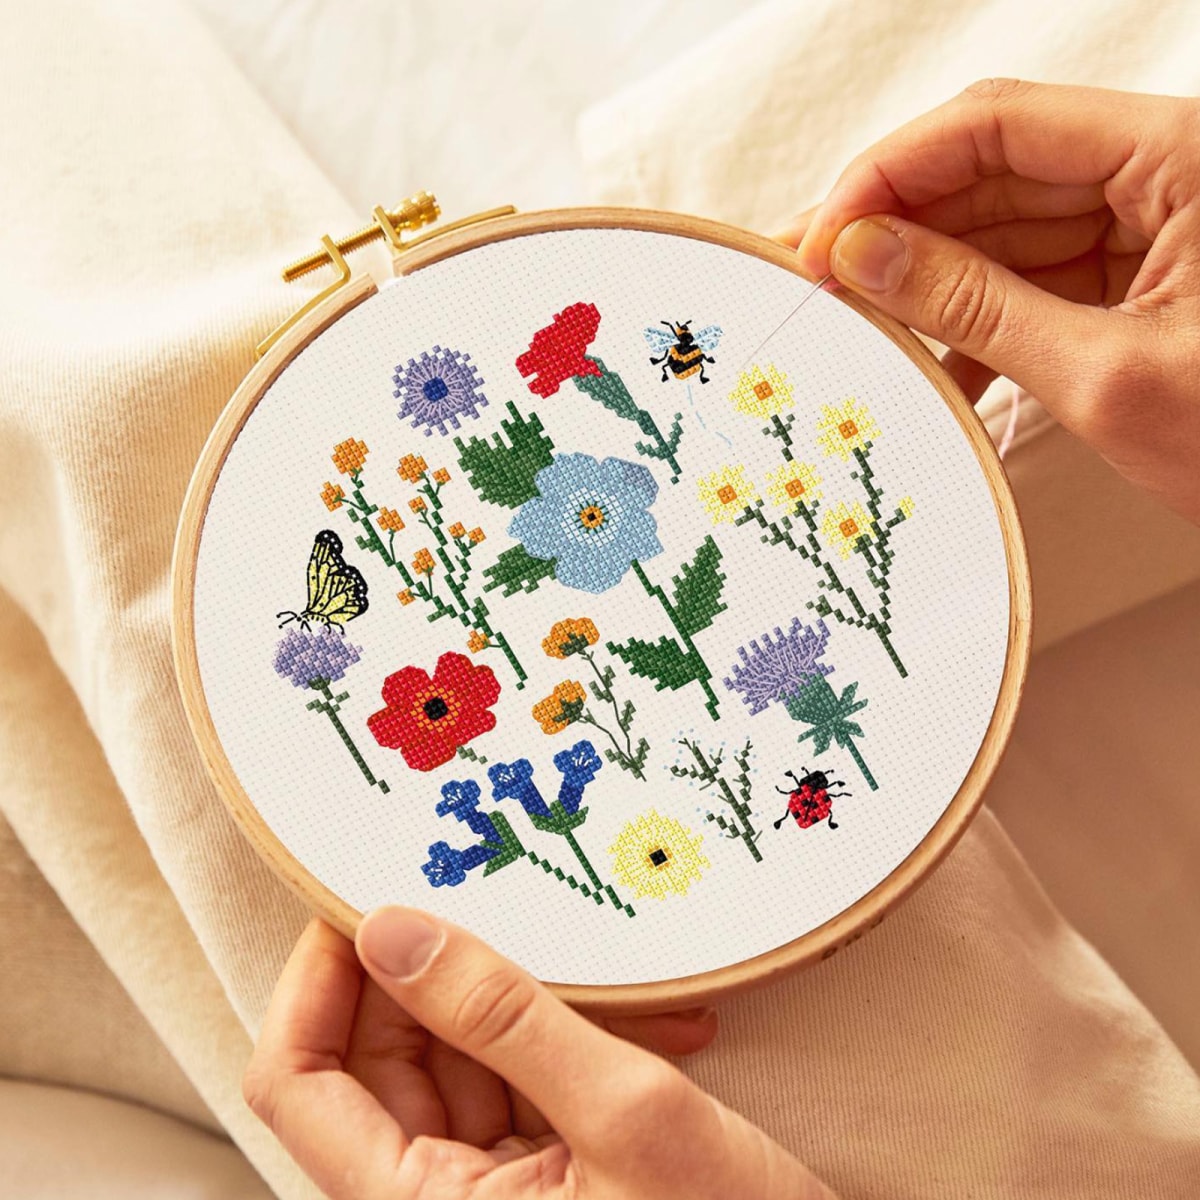 Hand Embroidered Patches embroidery pattern pdf instant download